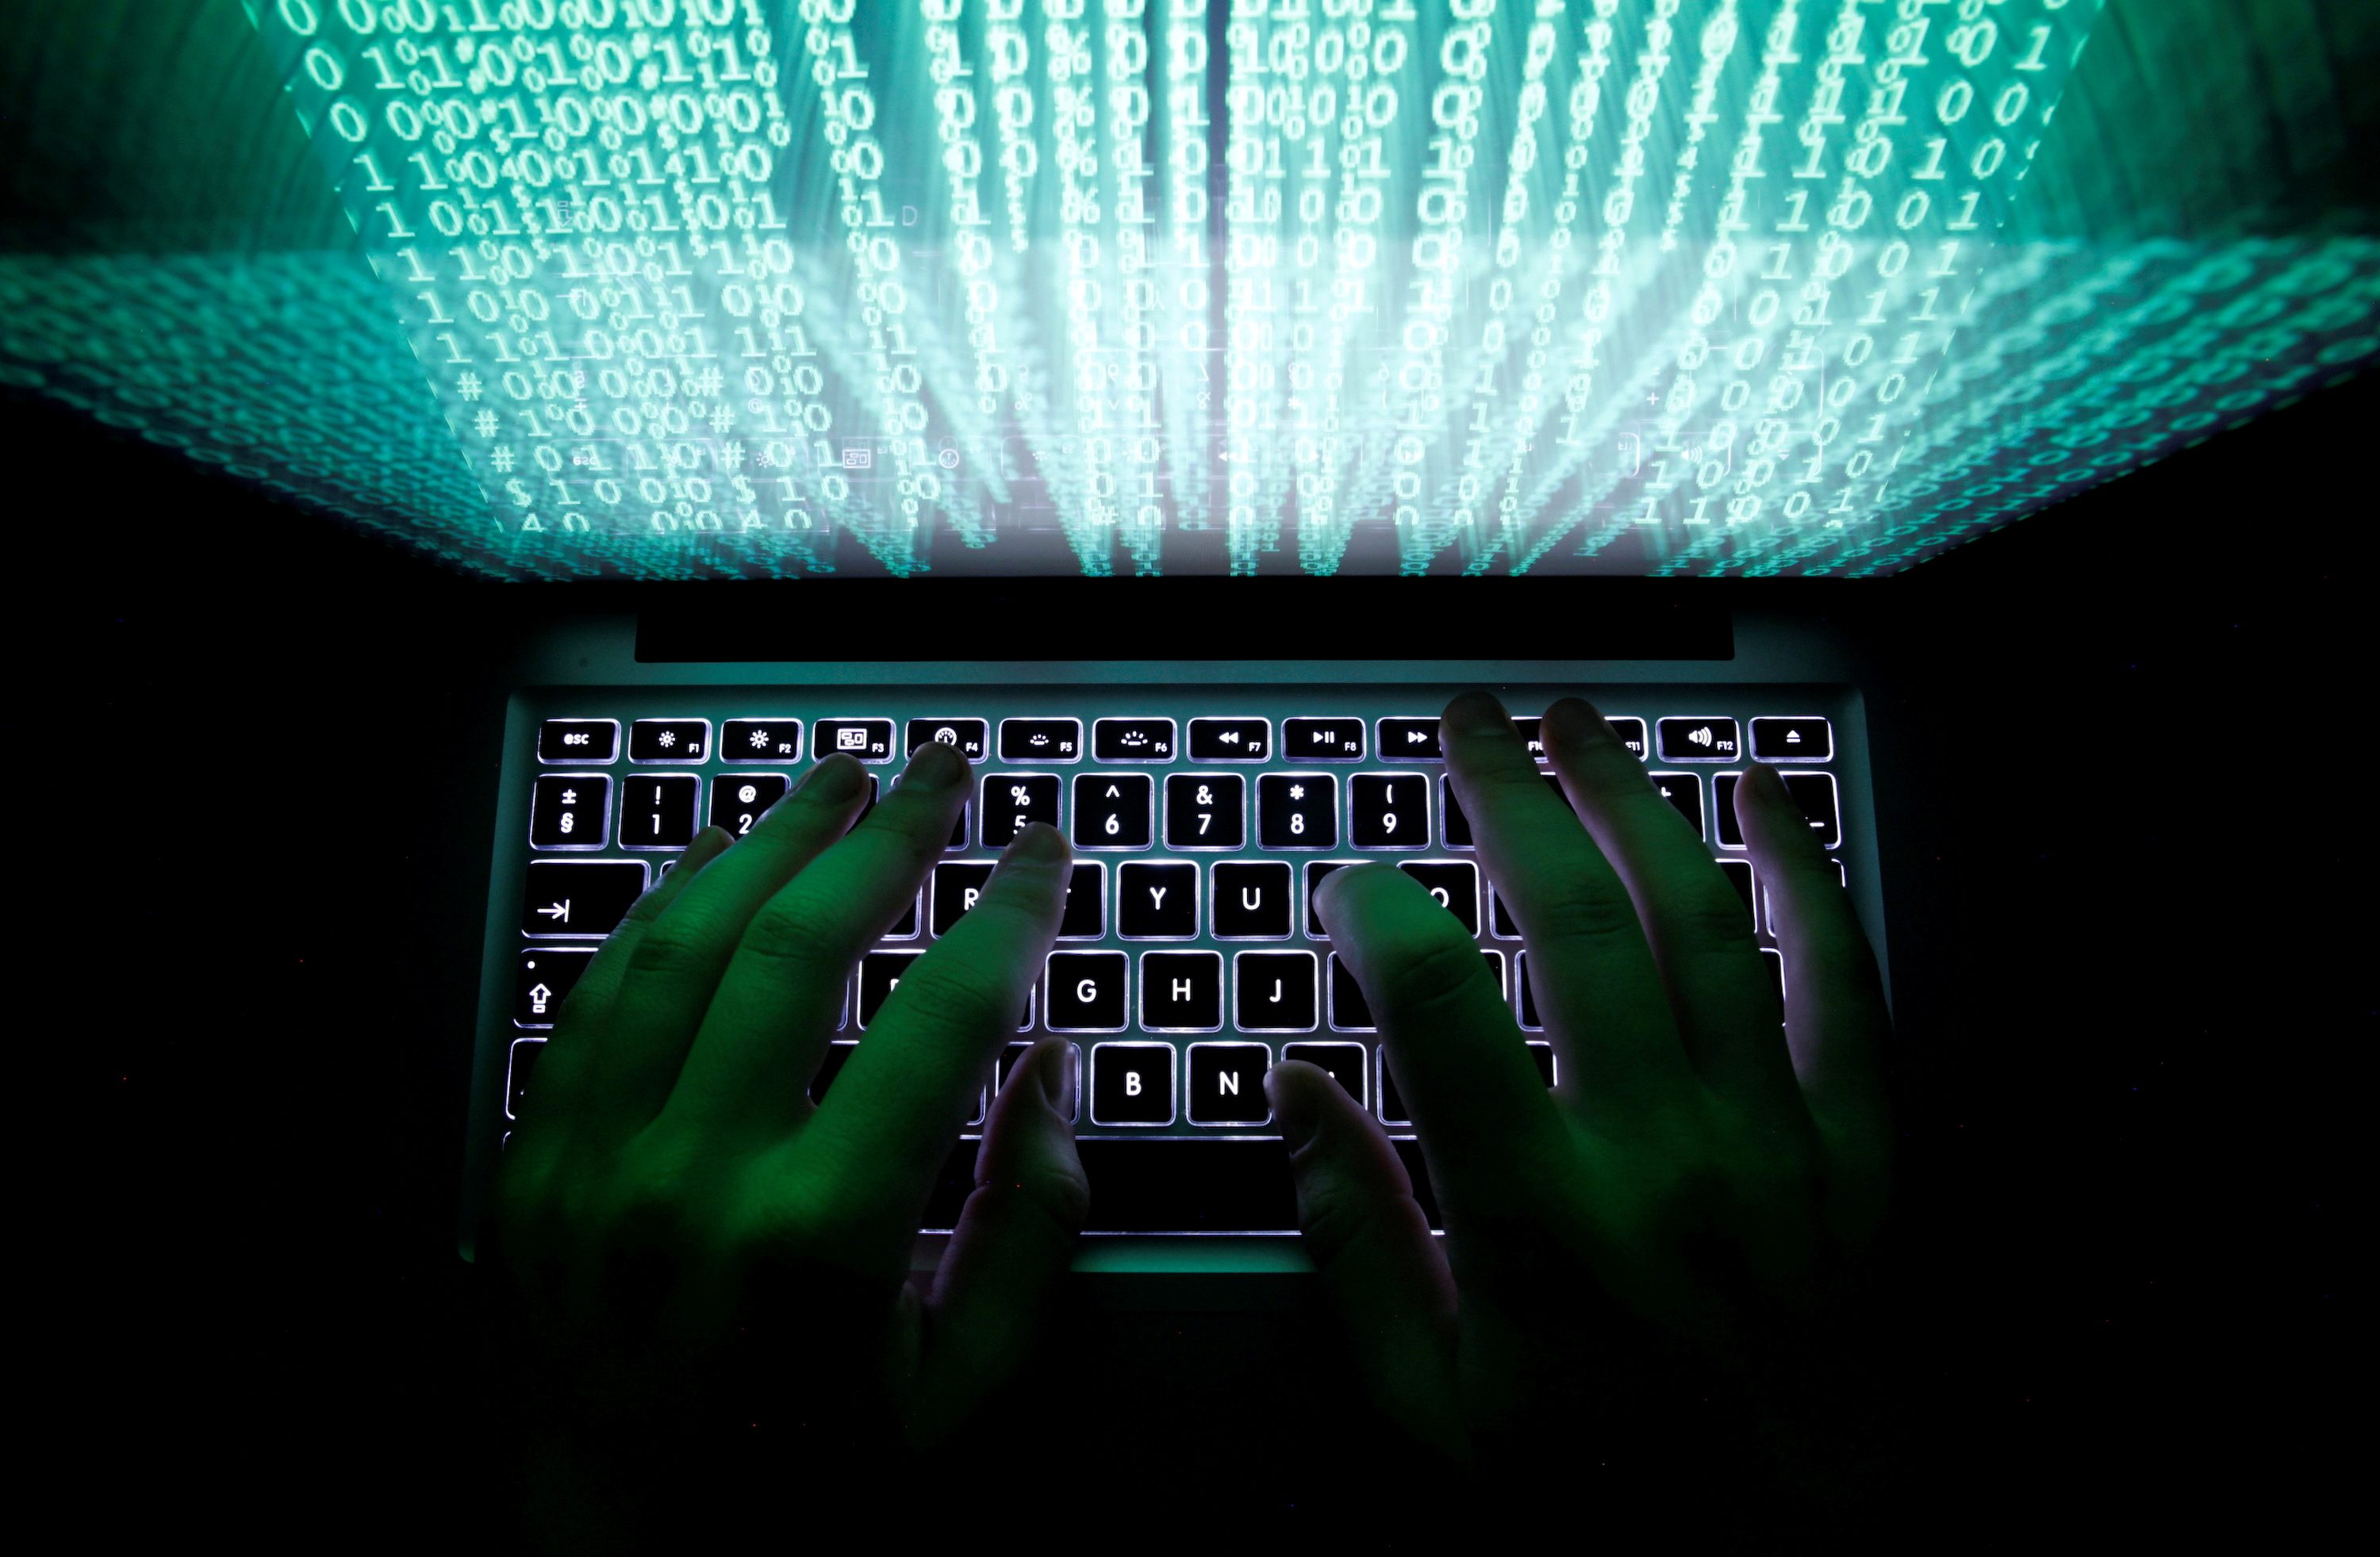 Senior Indonesian officials targeted by spyware in 2021 – sources